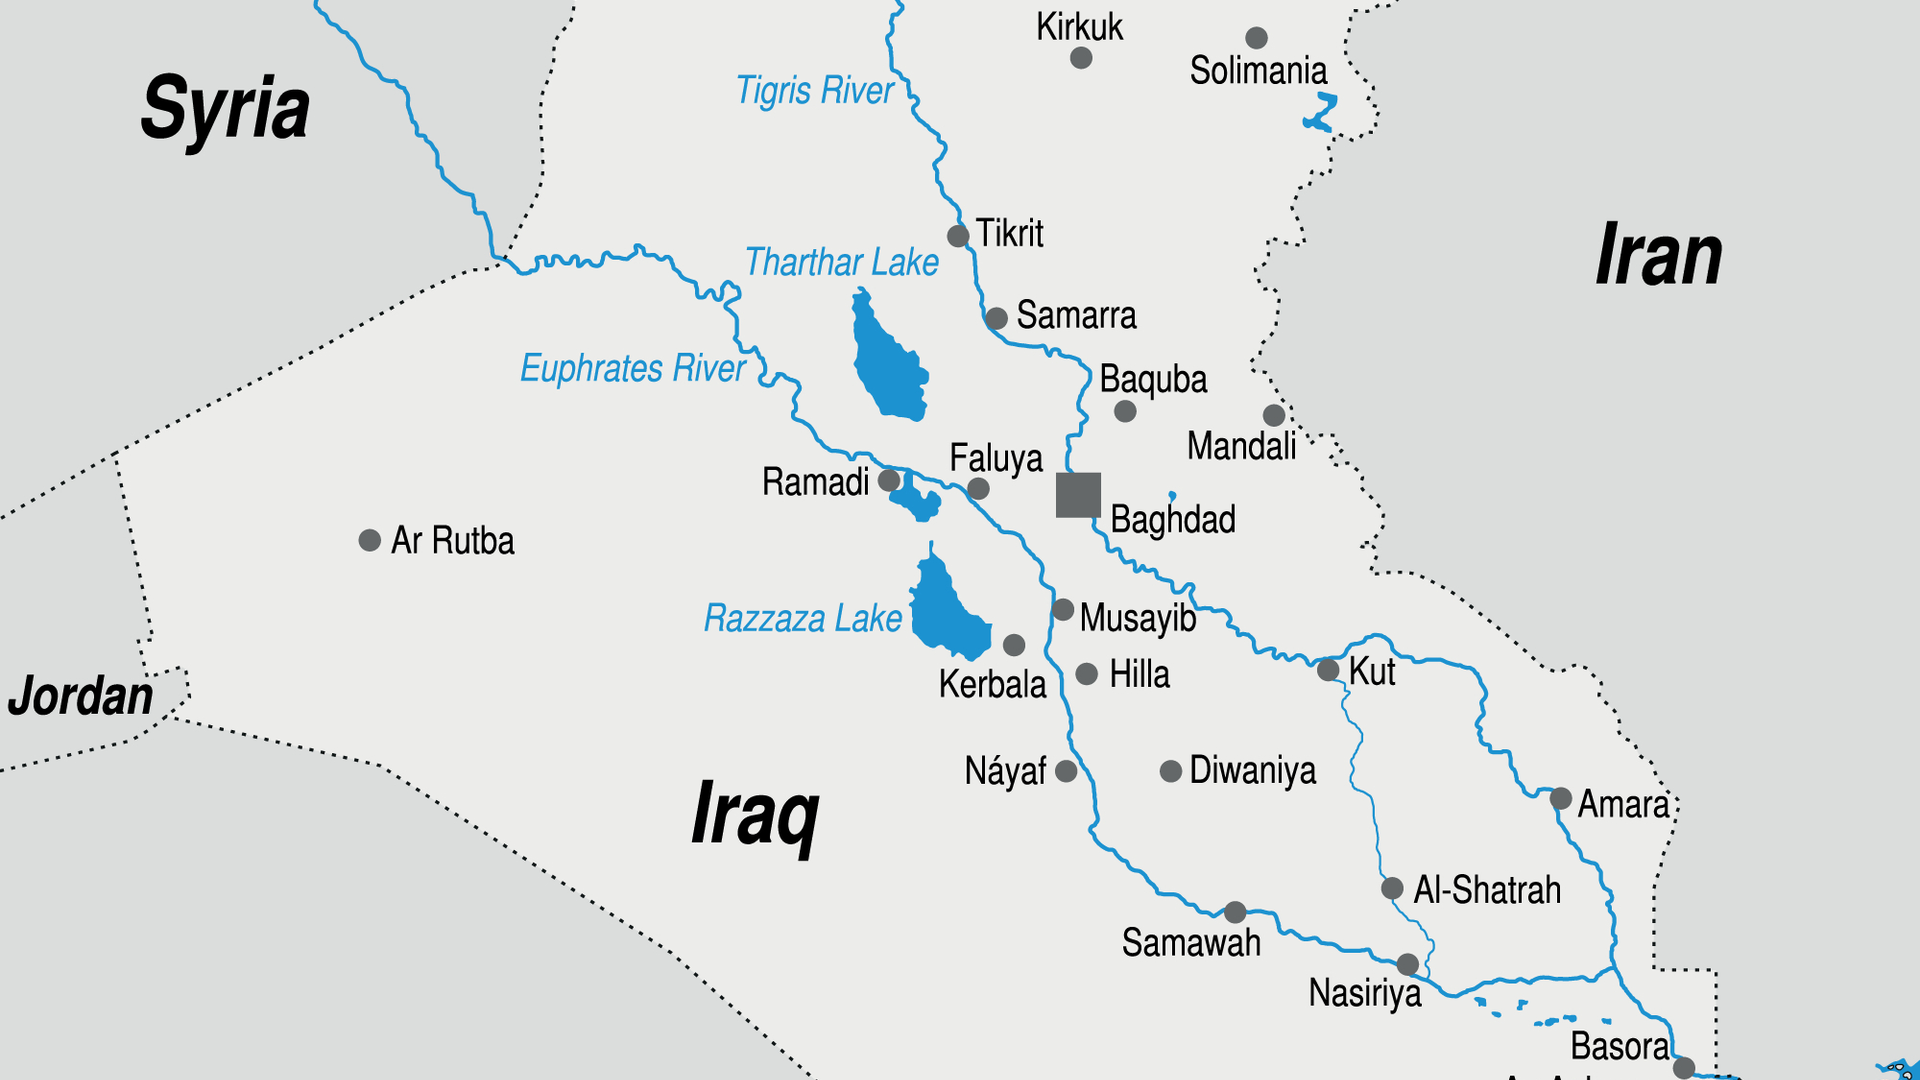 A map of the Tigris-Euphrates River Basin in the Middle East.